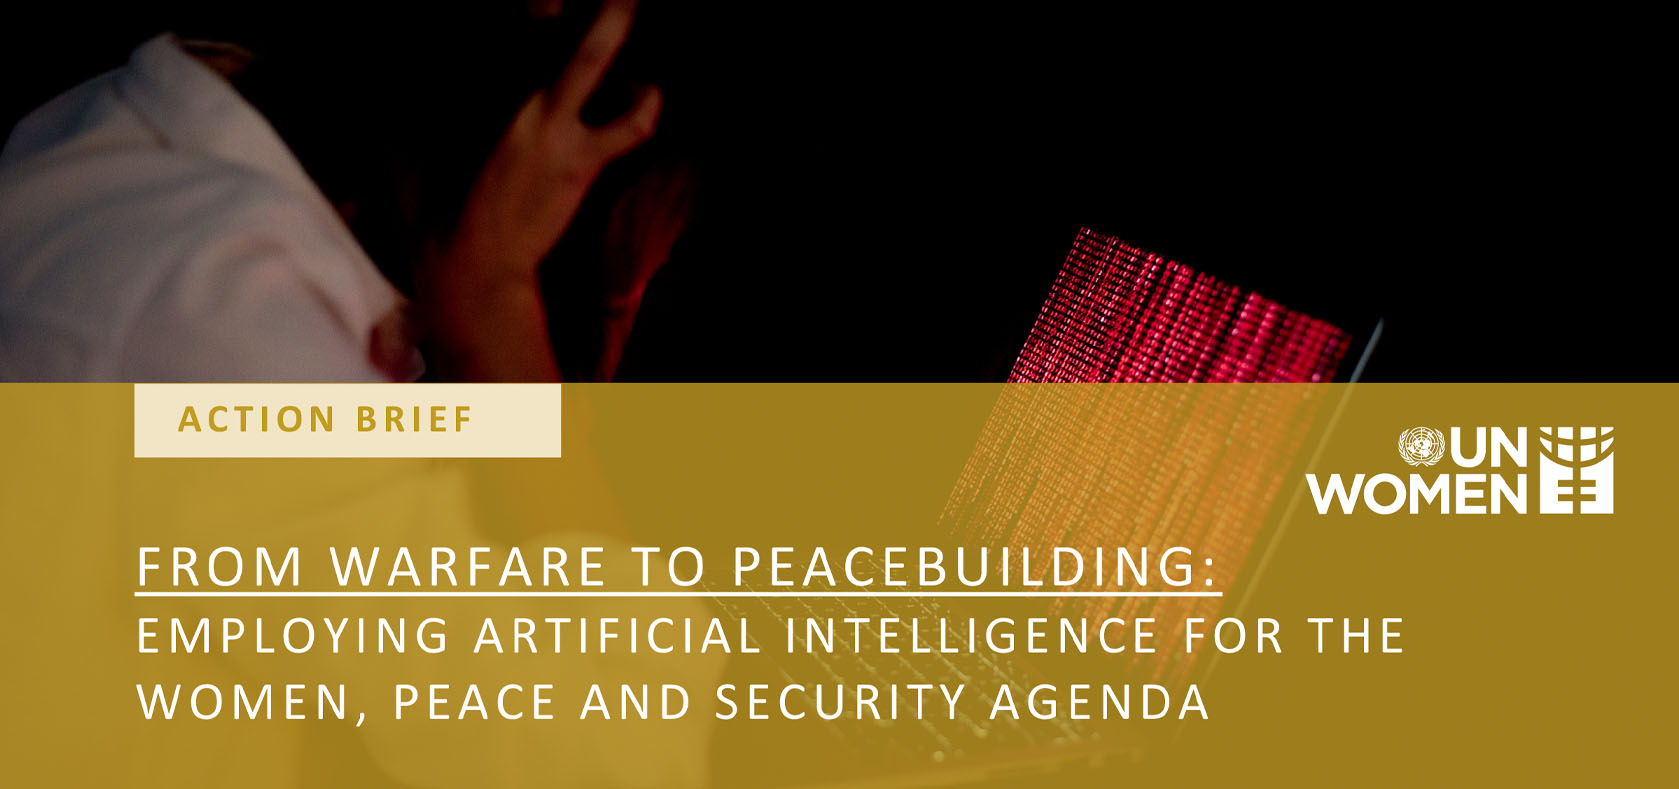 Action Brief – From Warfare to Peacebuilding: Employing Artificial Intelligence for Women, Peace and Security